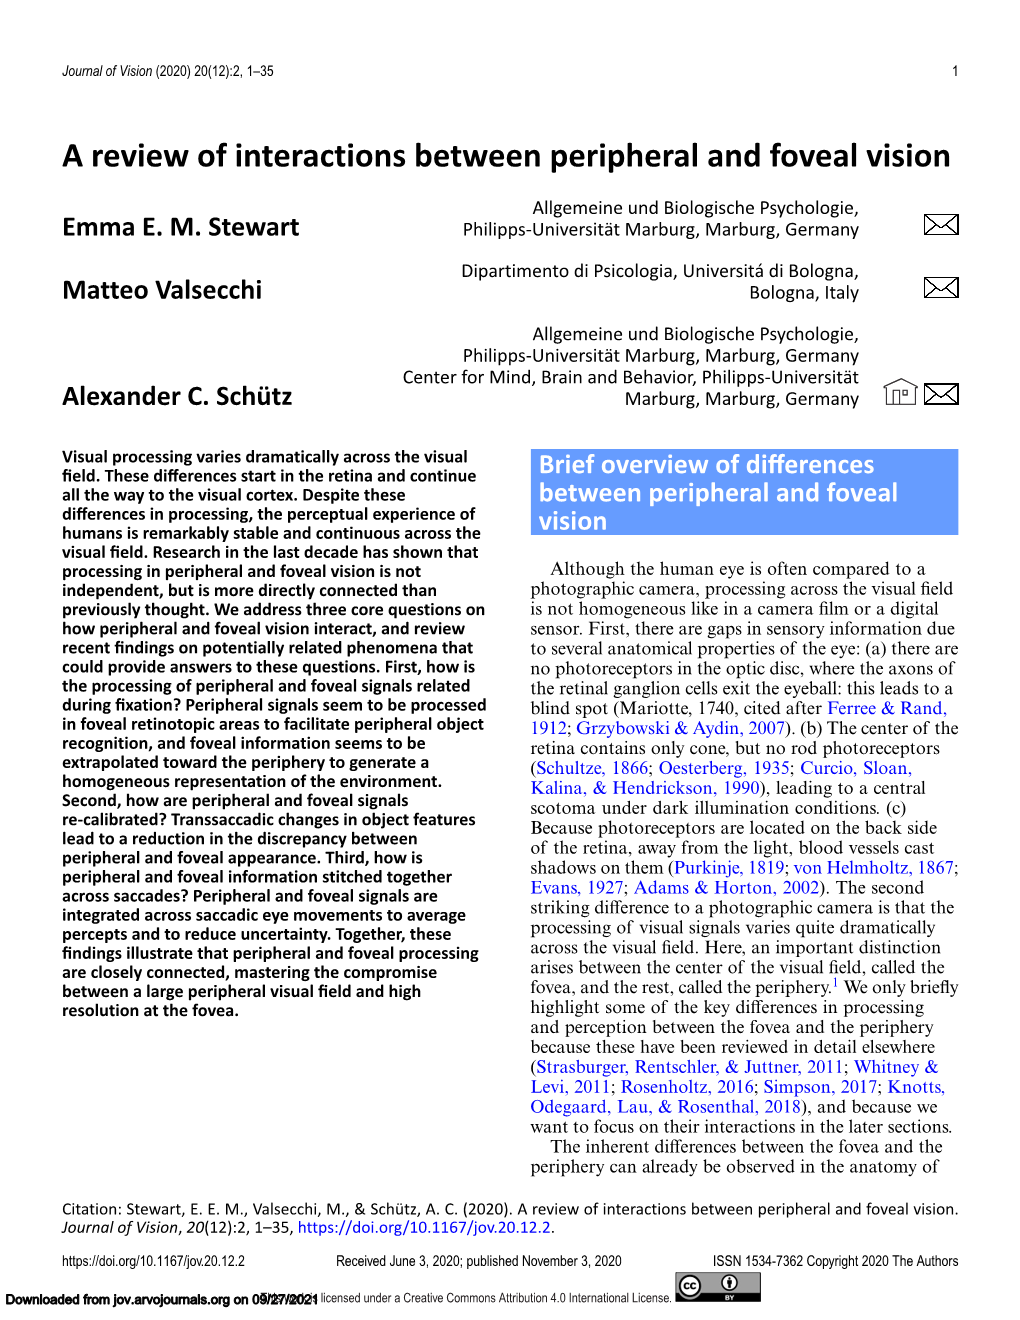 A Review of Interactions Between Peripheral and Foveal Vision